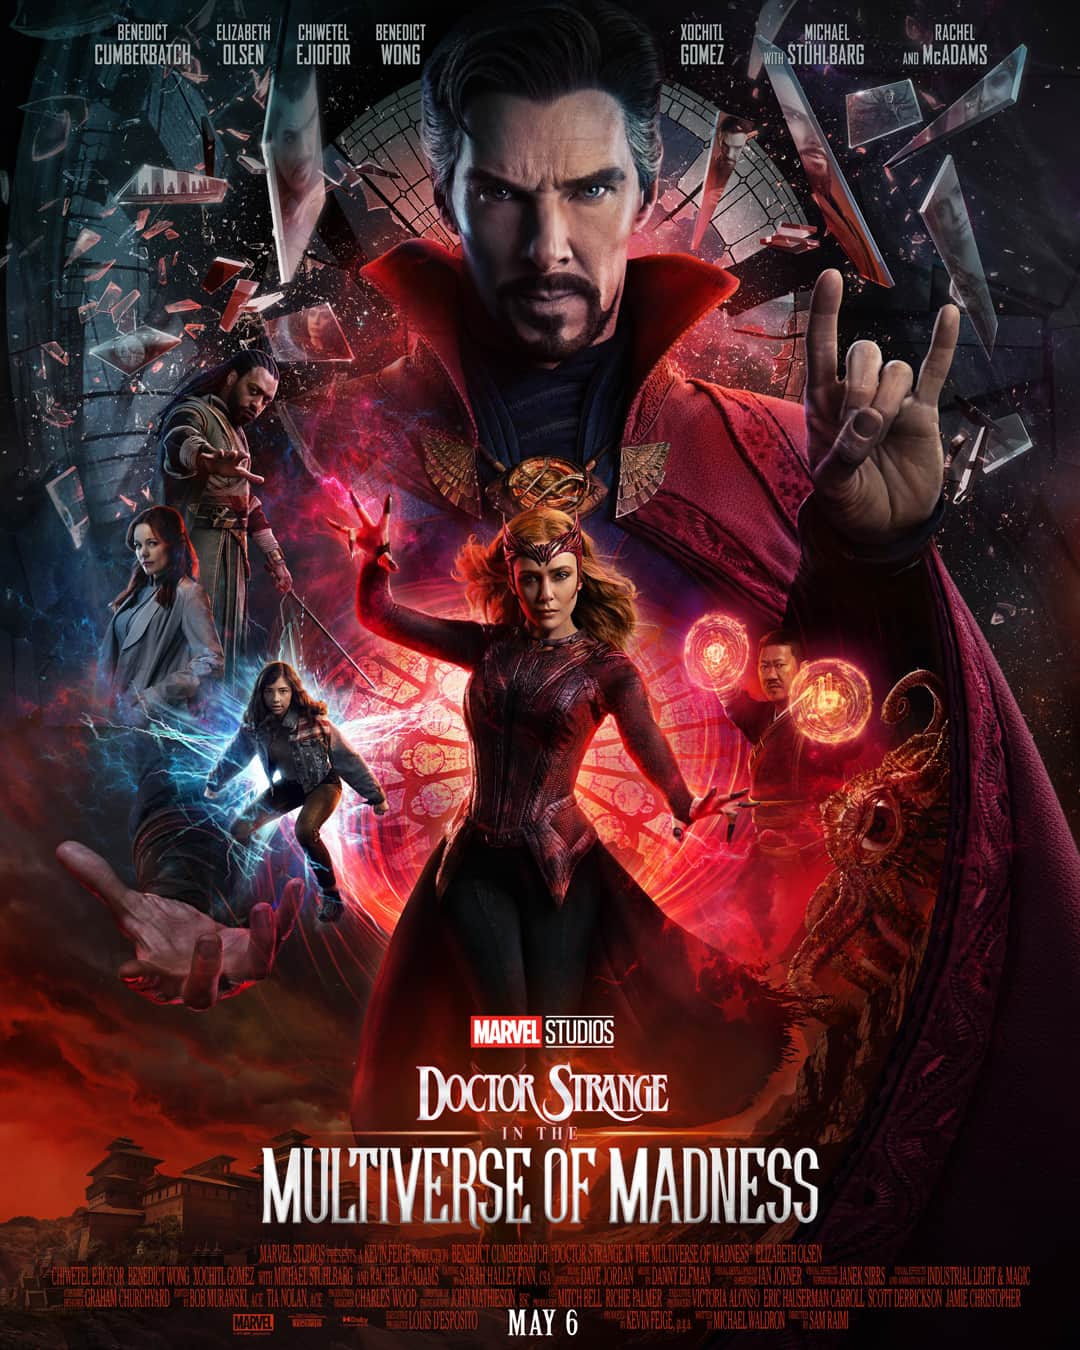 In the United States, advance booking for Doctor Strange in the Multiverse of Madness begins